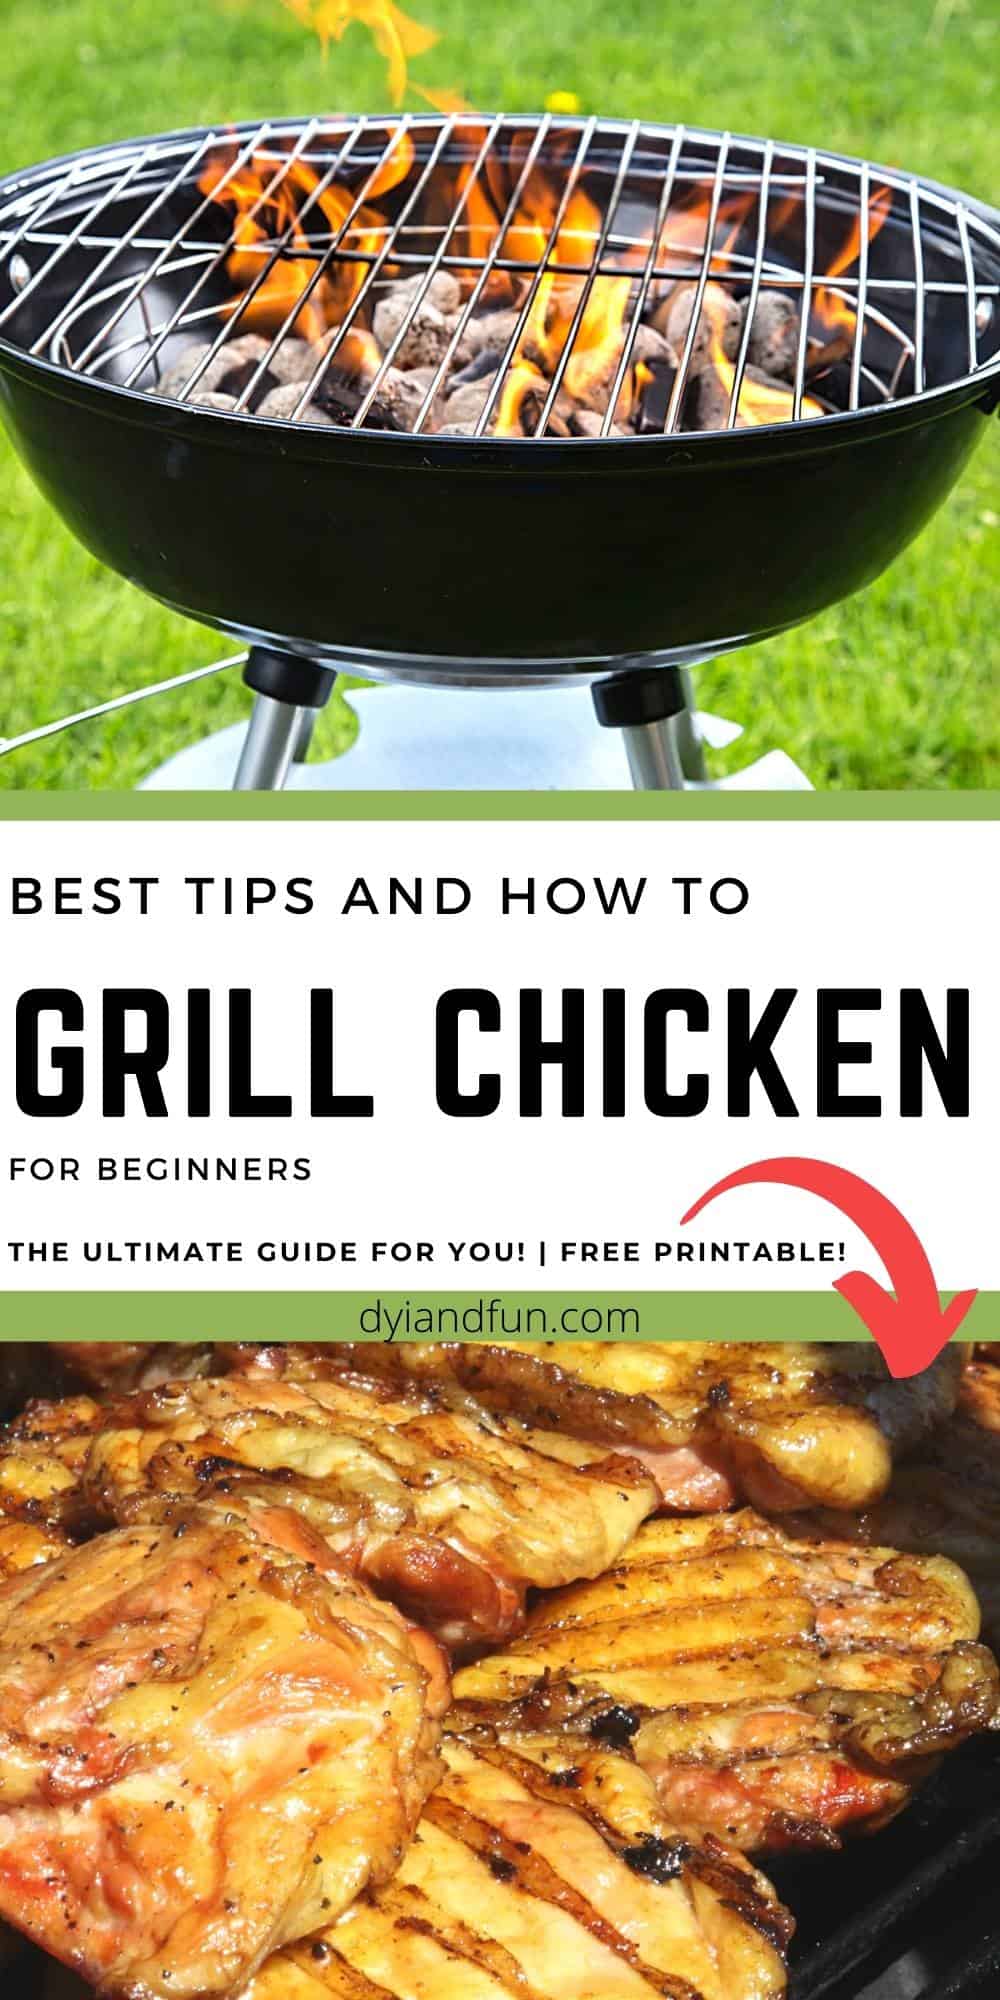 How to Grill Amazing Tasting Chicken